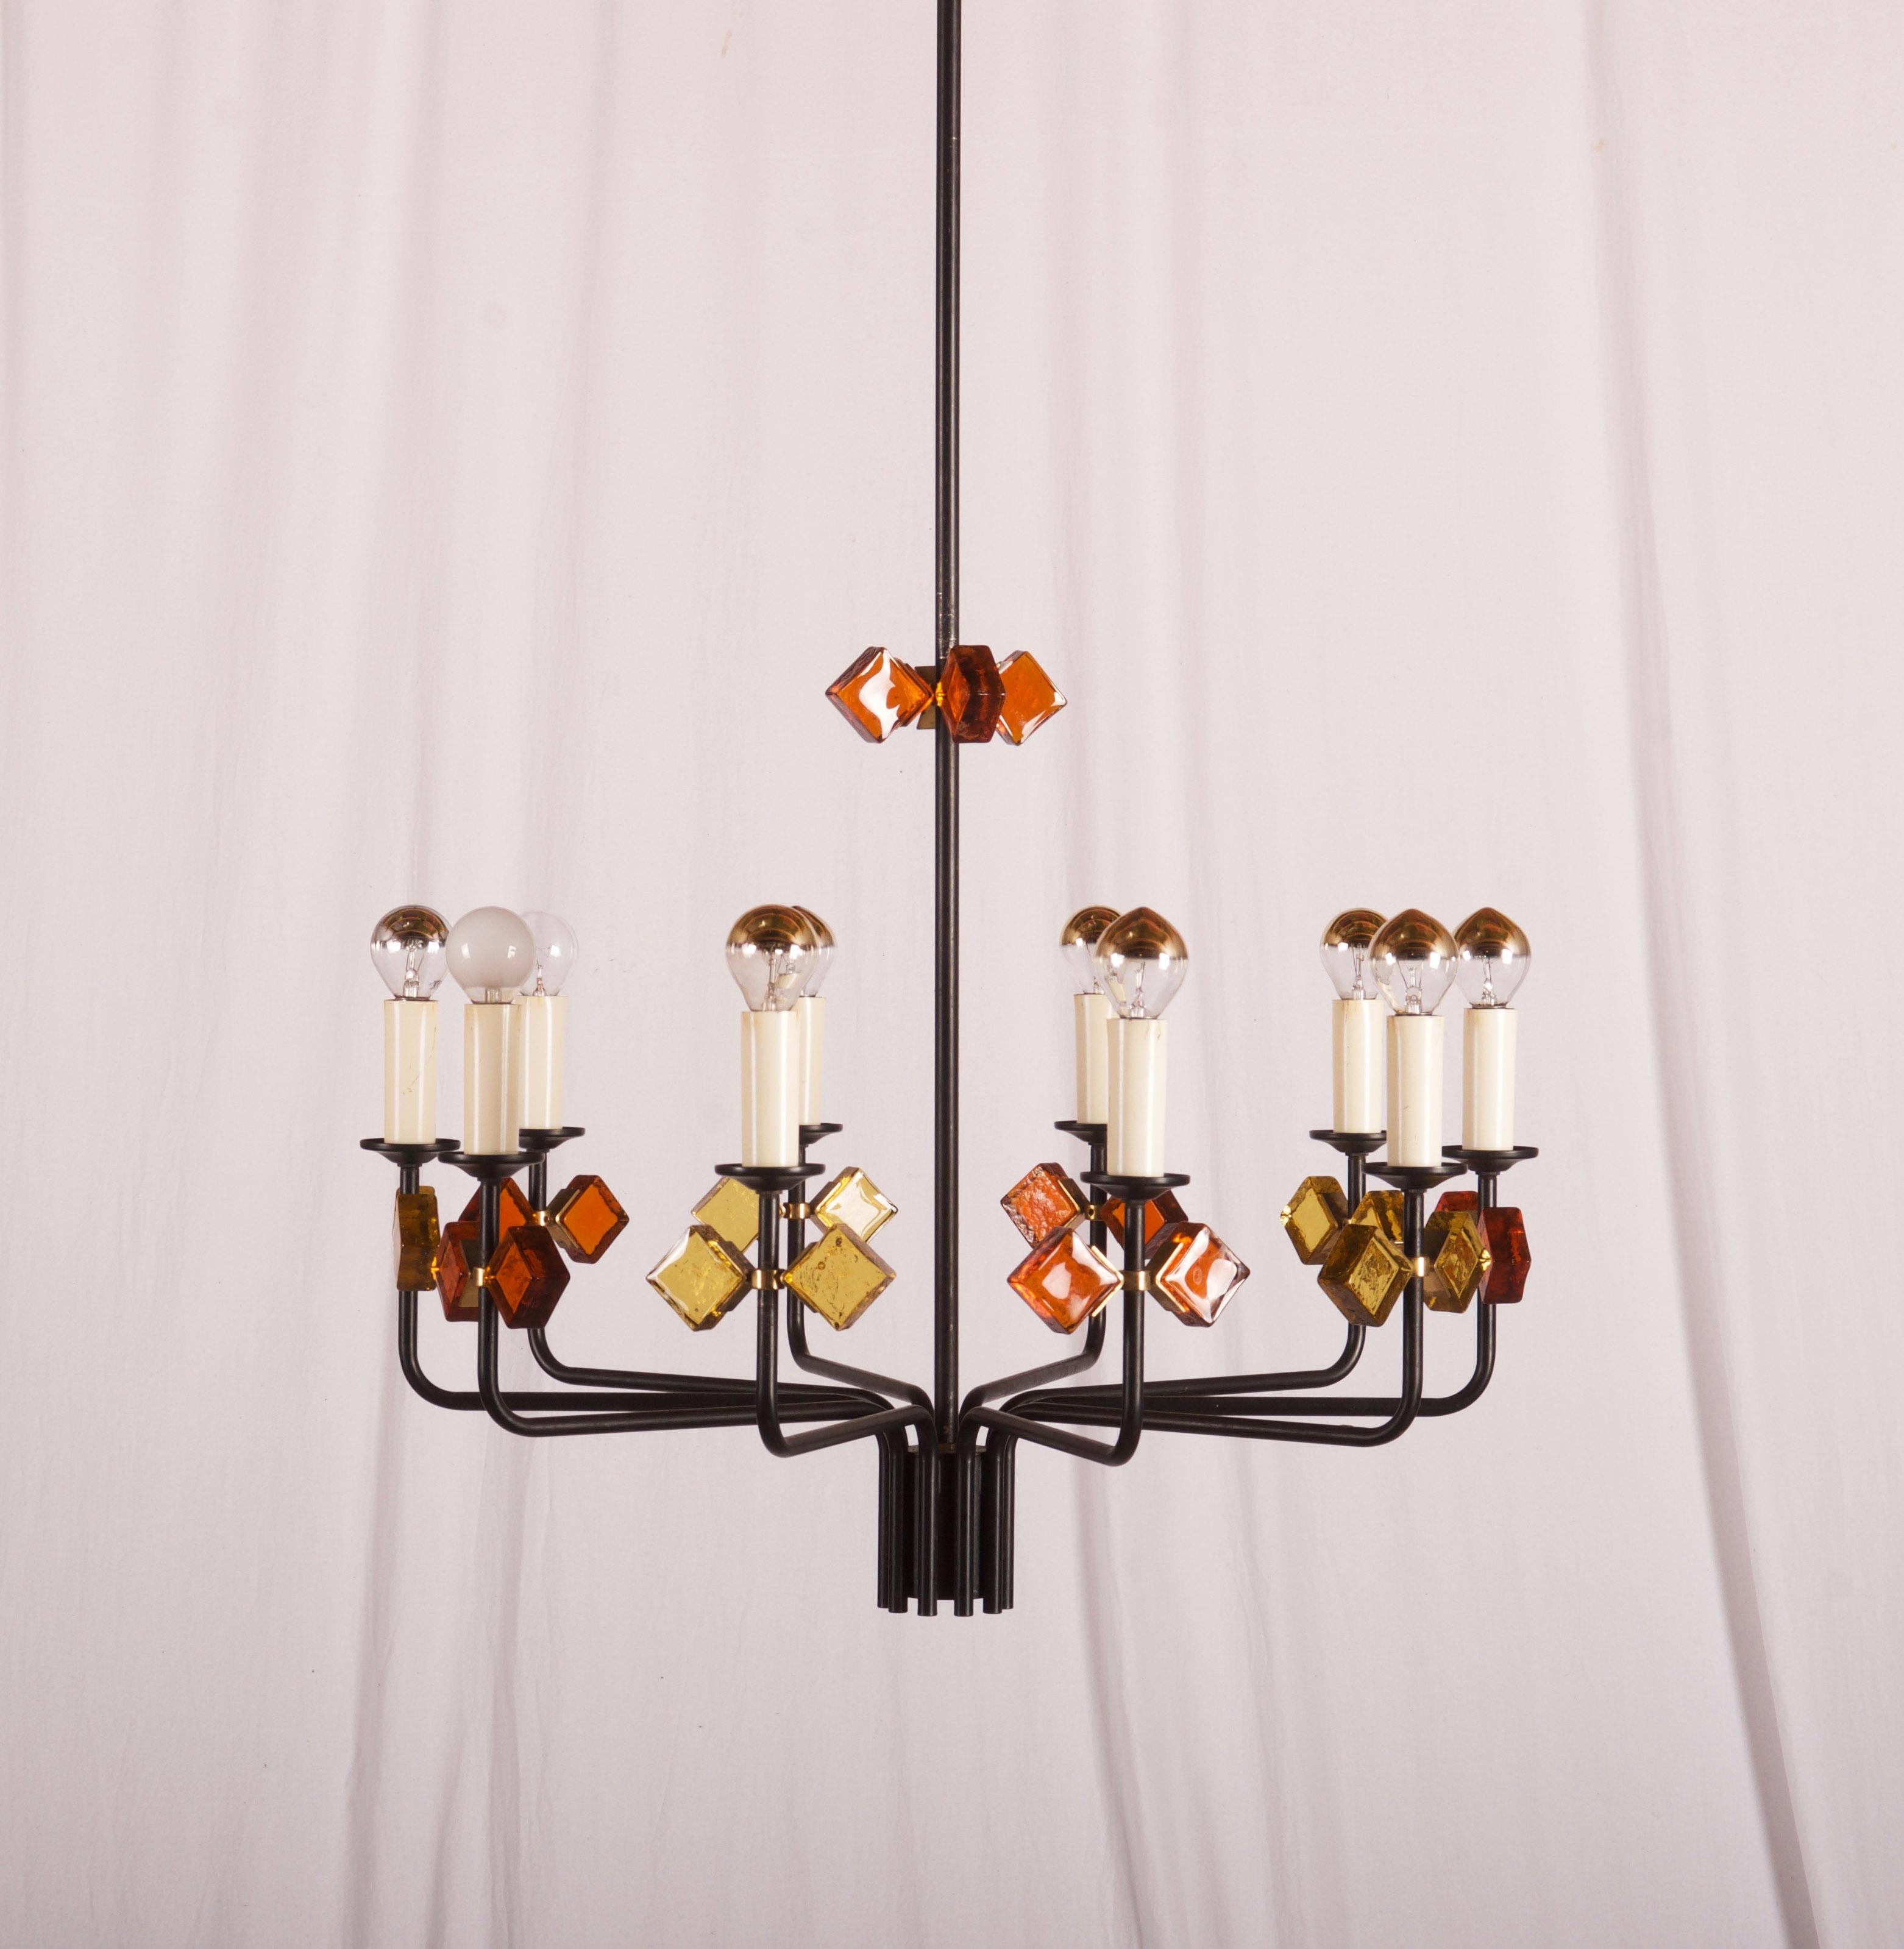 Mid-20th Century Scandinavian Glass & Iron Chandelier by Svend Aage Holm Sorensen For Sale